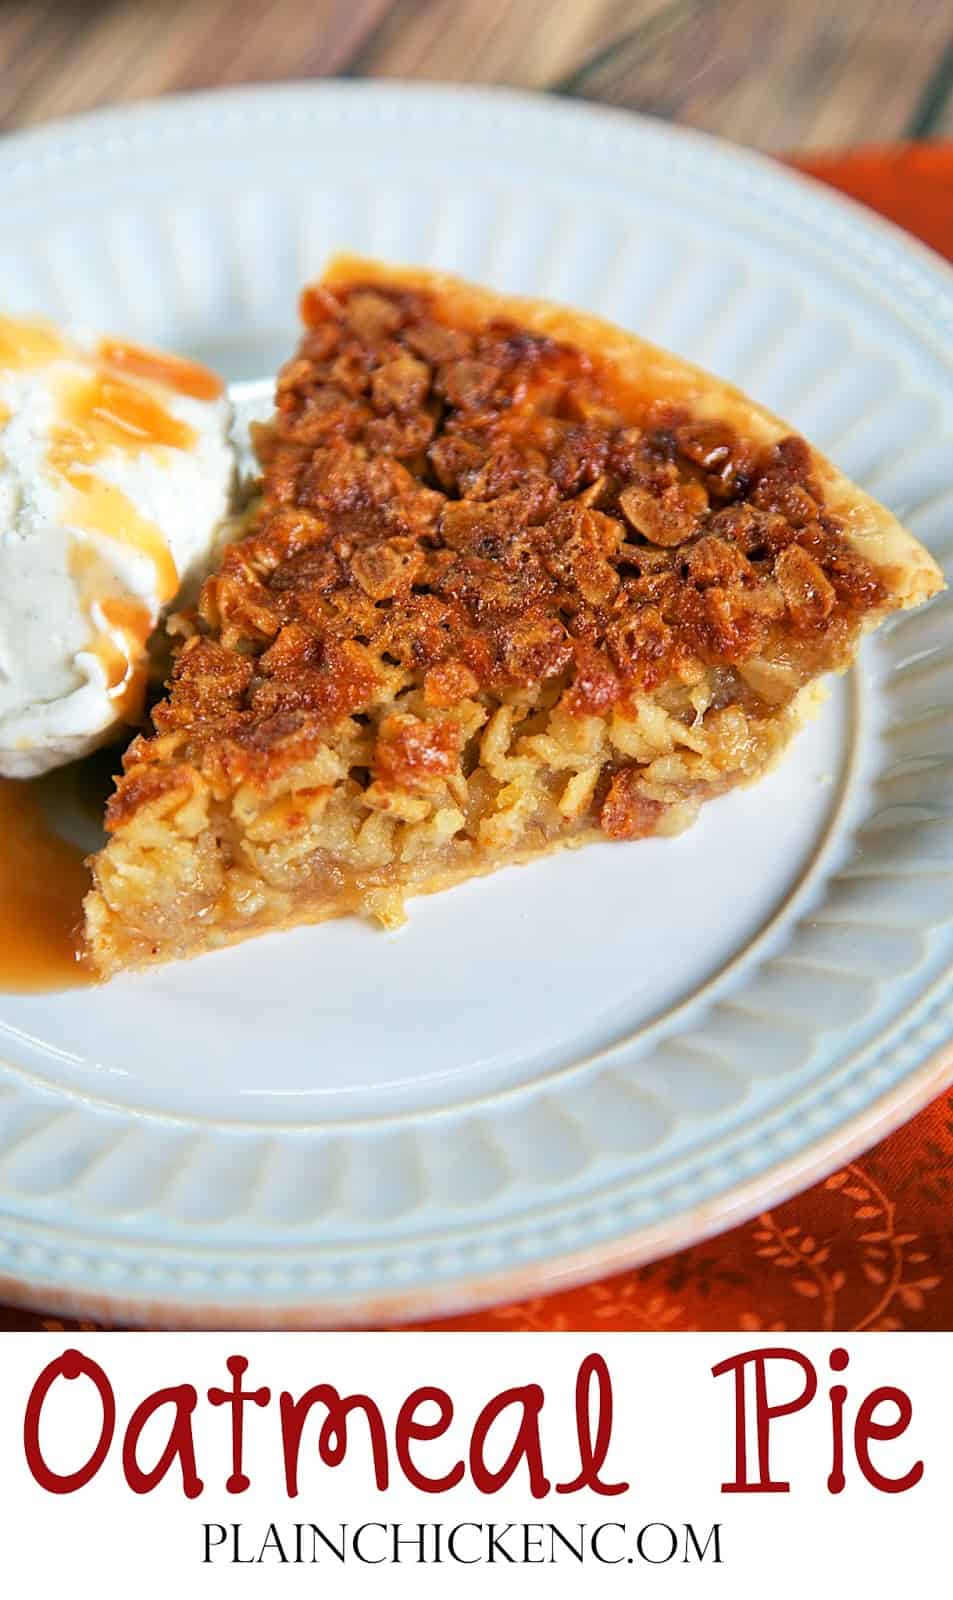 Oatmeal Pie - tastes as good as pecan pie without the expense! This pie can be made several days in advance. Serve warm with ice cream. YUM! Great for the holidays.